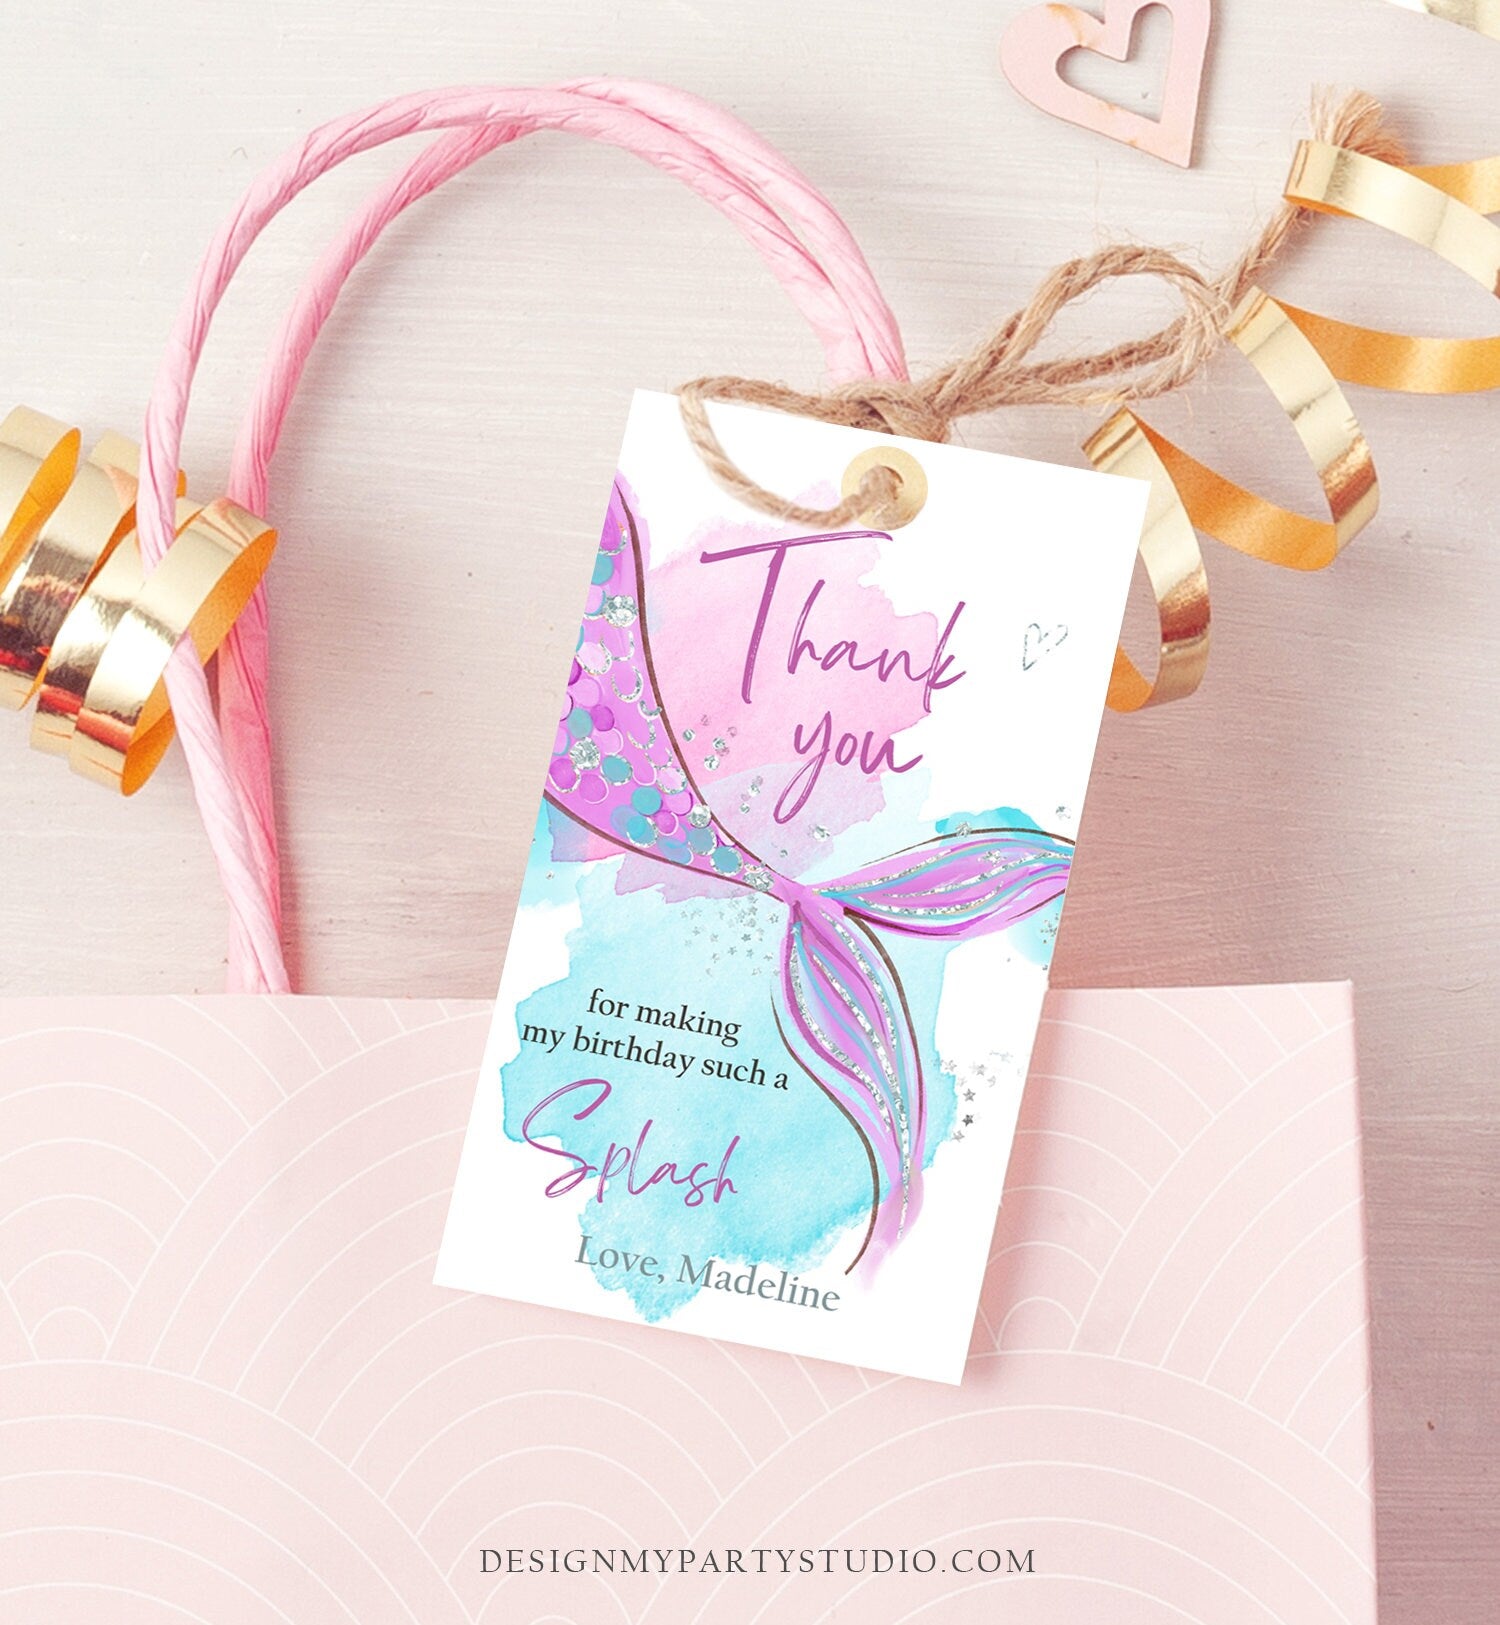 Editable Mermaid Birthday Favor Tags Under The Sea Thank You Mermaid Party Girl Pink Purple Silver Download Template Corjl PRINTABLE 0403